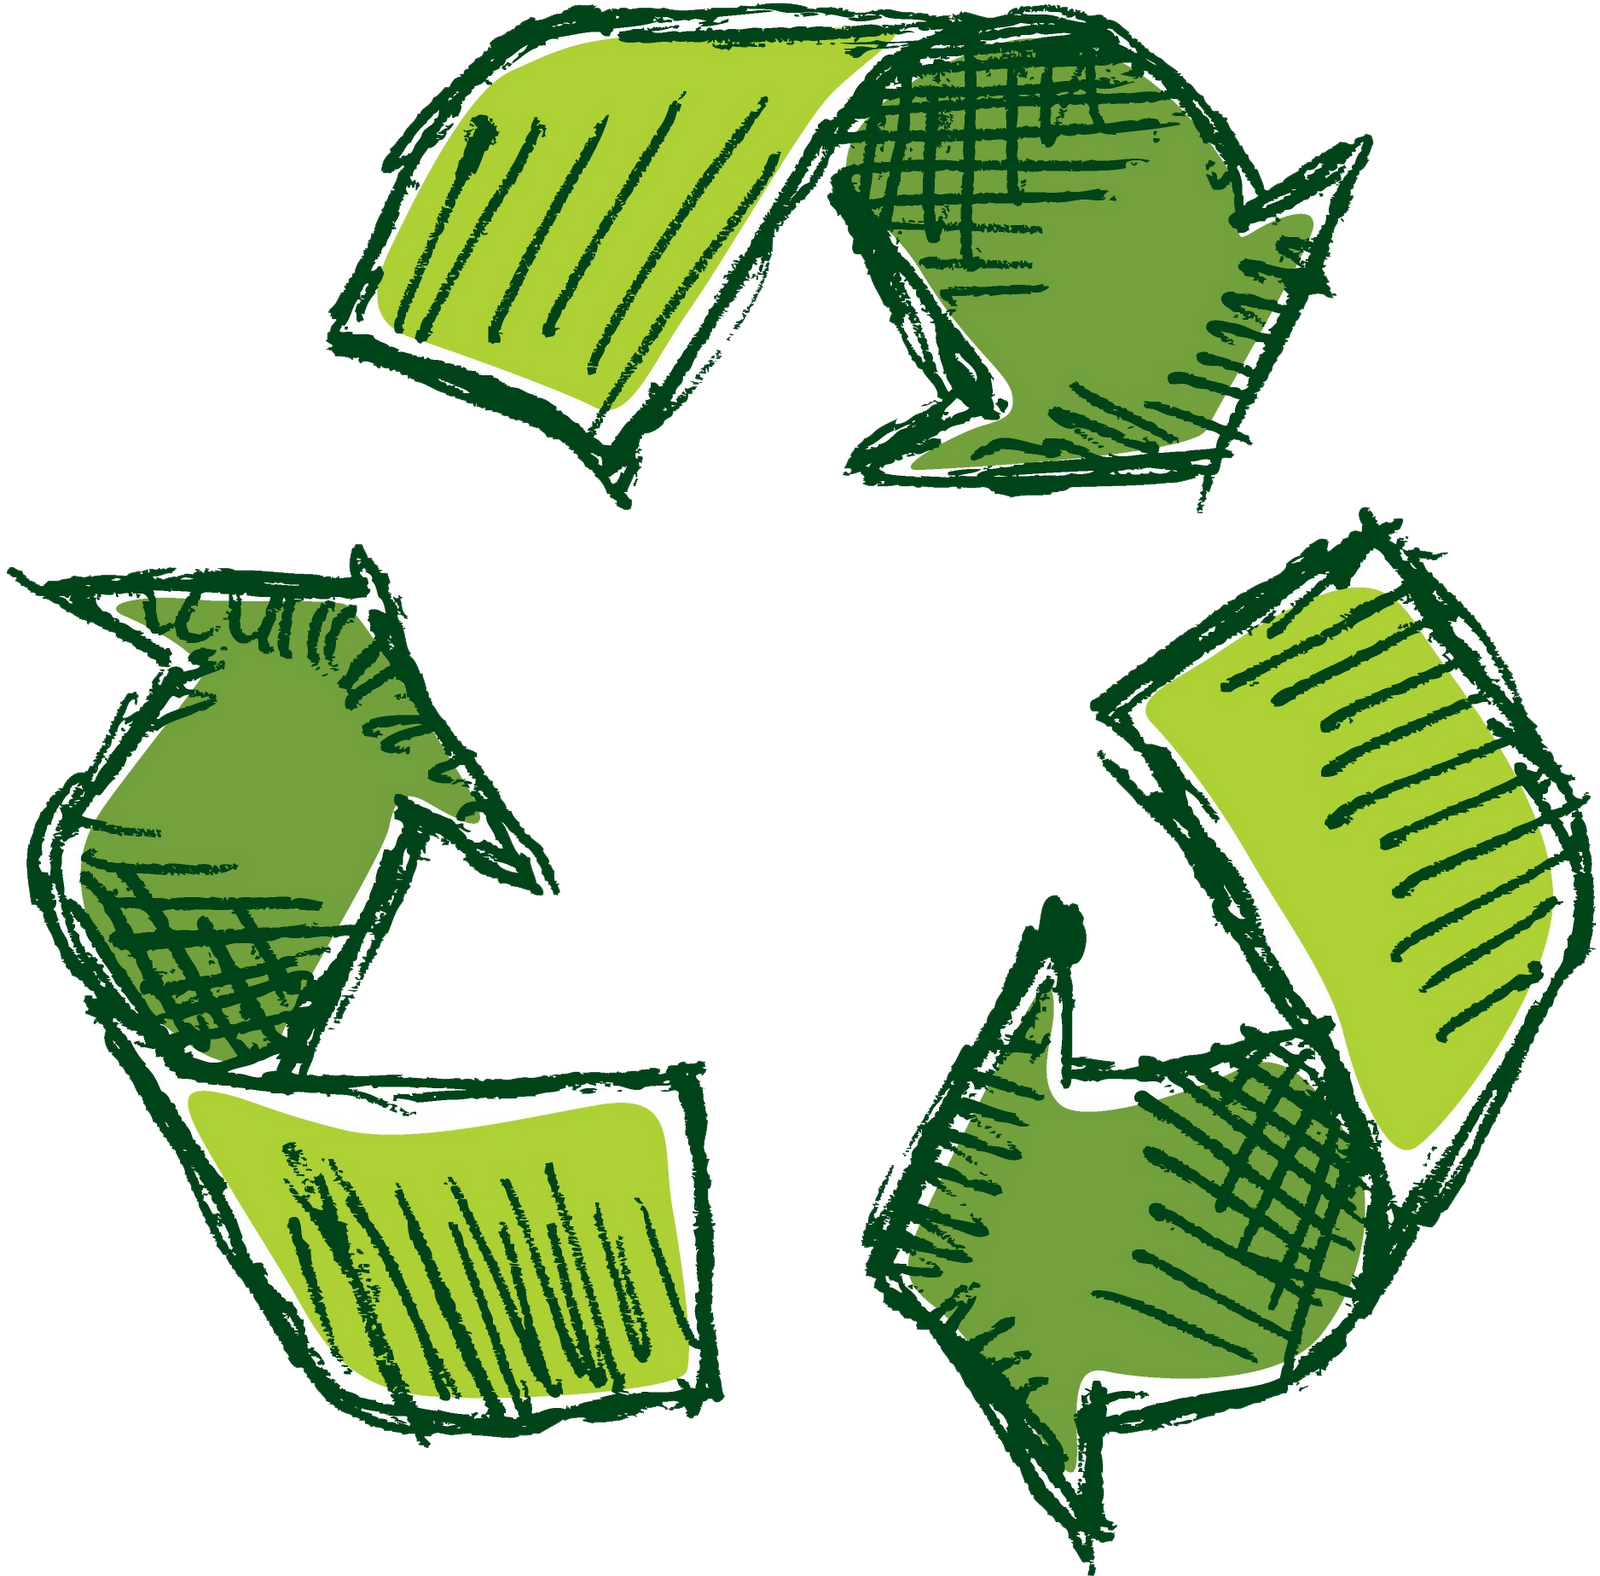 Landfill Recycle Symbol Recycling HD Image Free PNG PNG Image